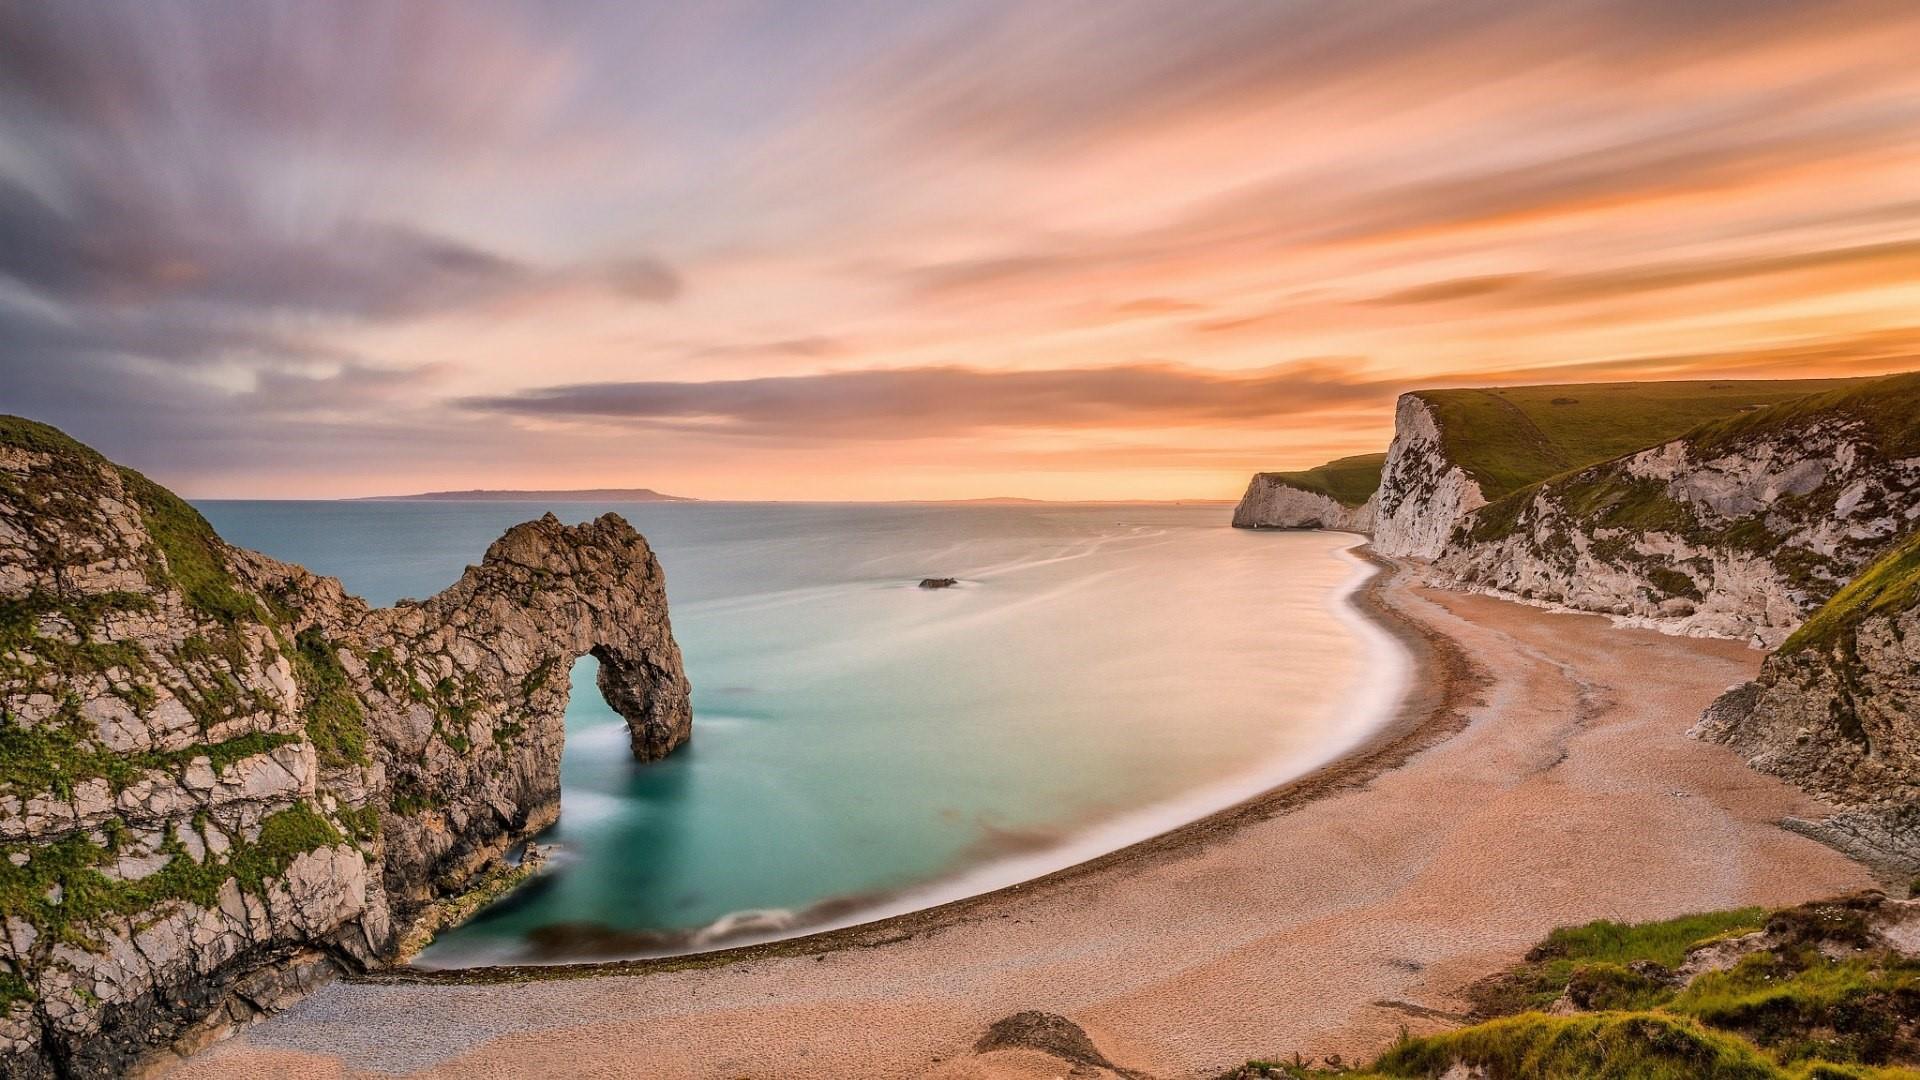 52 Durdle Door Hd Wallpapers Background Images Wallpaper Abyss Images